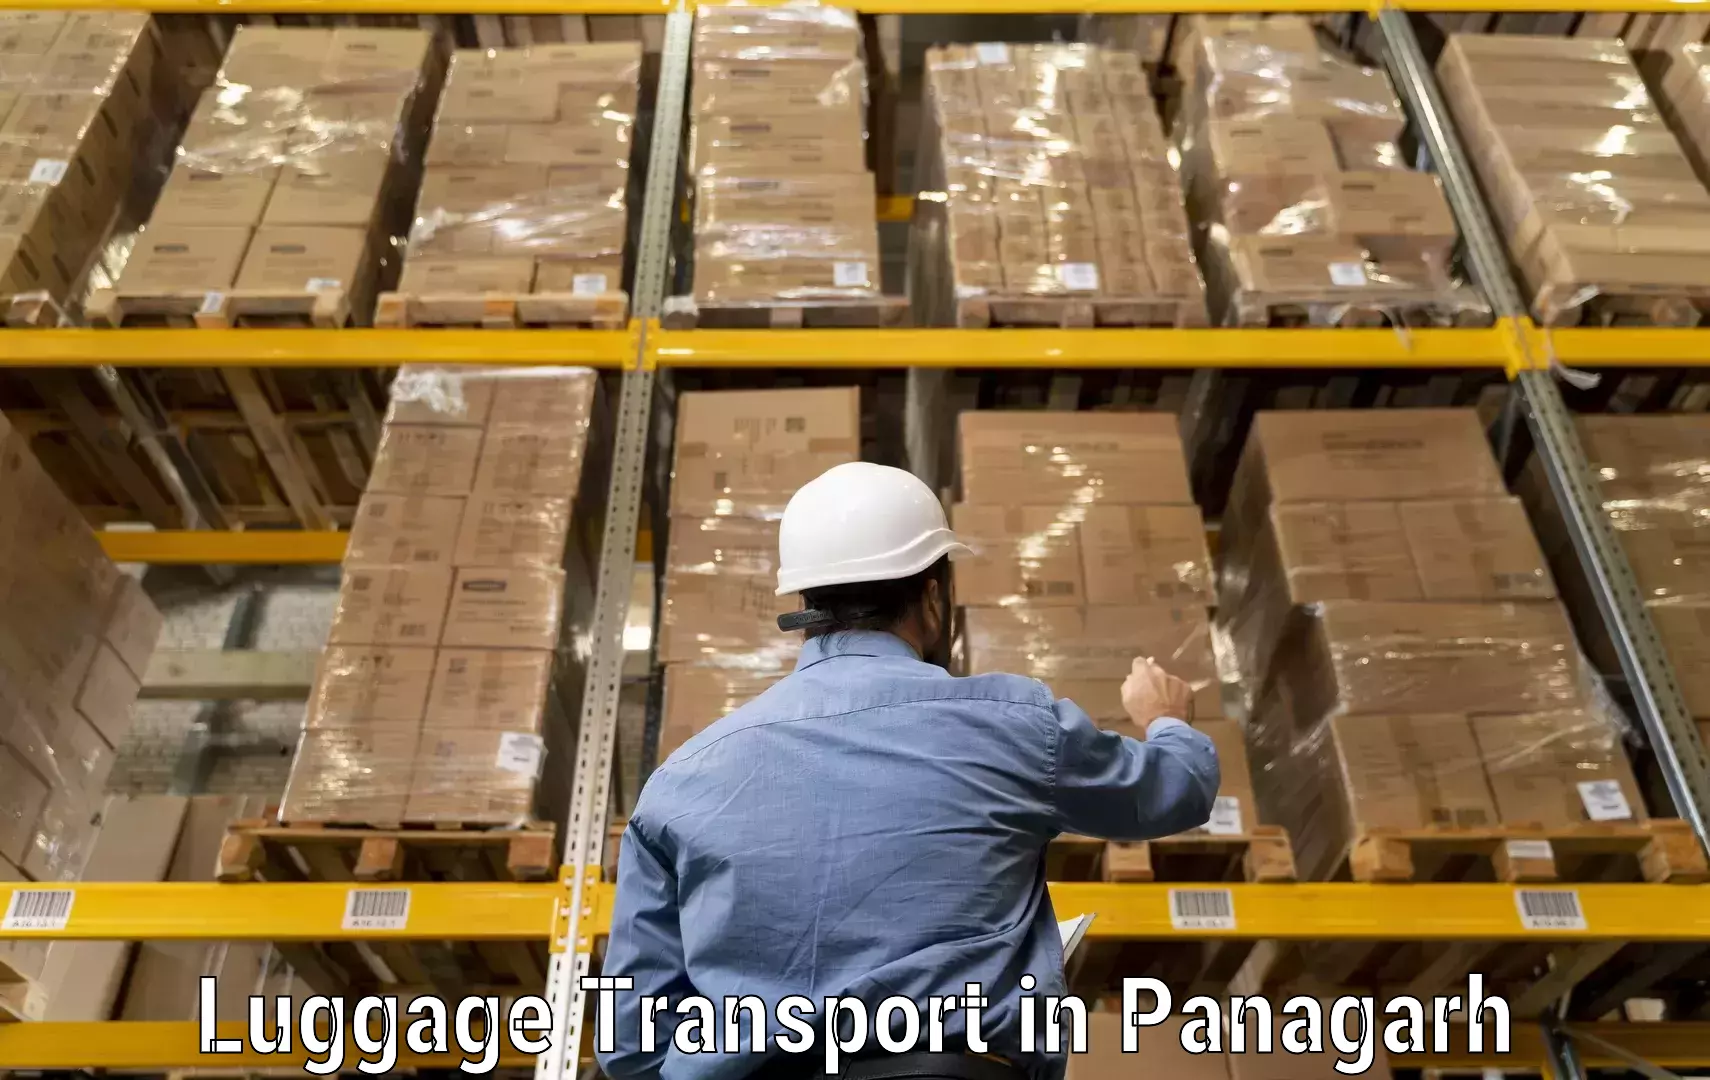 High-quality baggage shipment in Panagarh